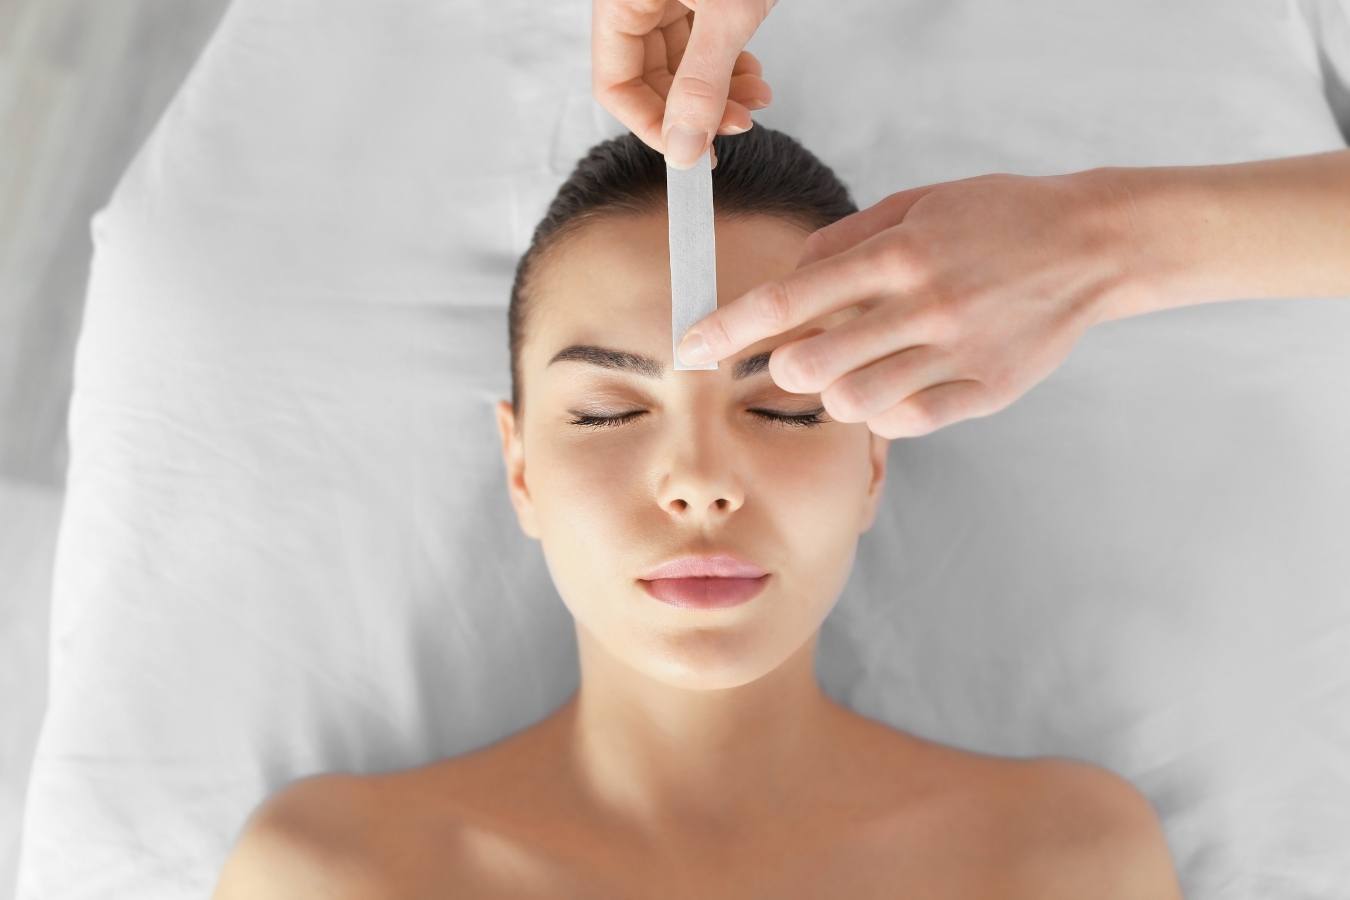 Should You Dye Eyebrows Before Or After Waxing